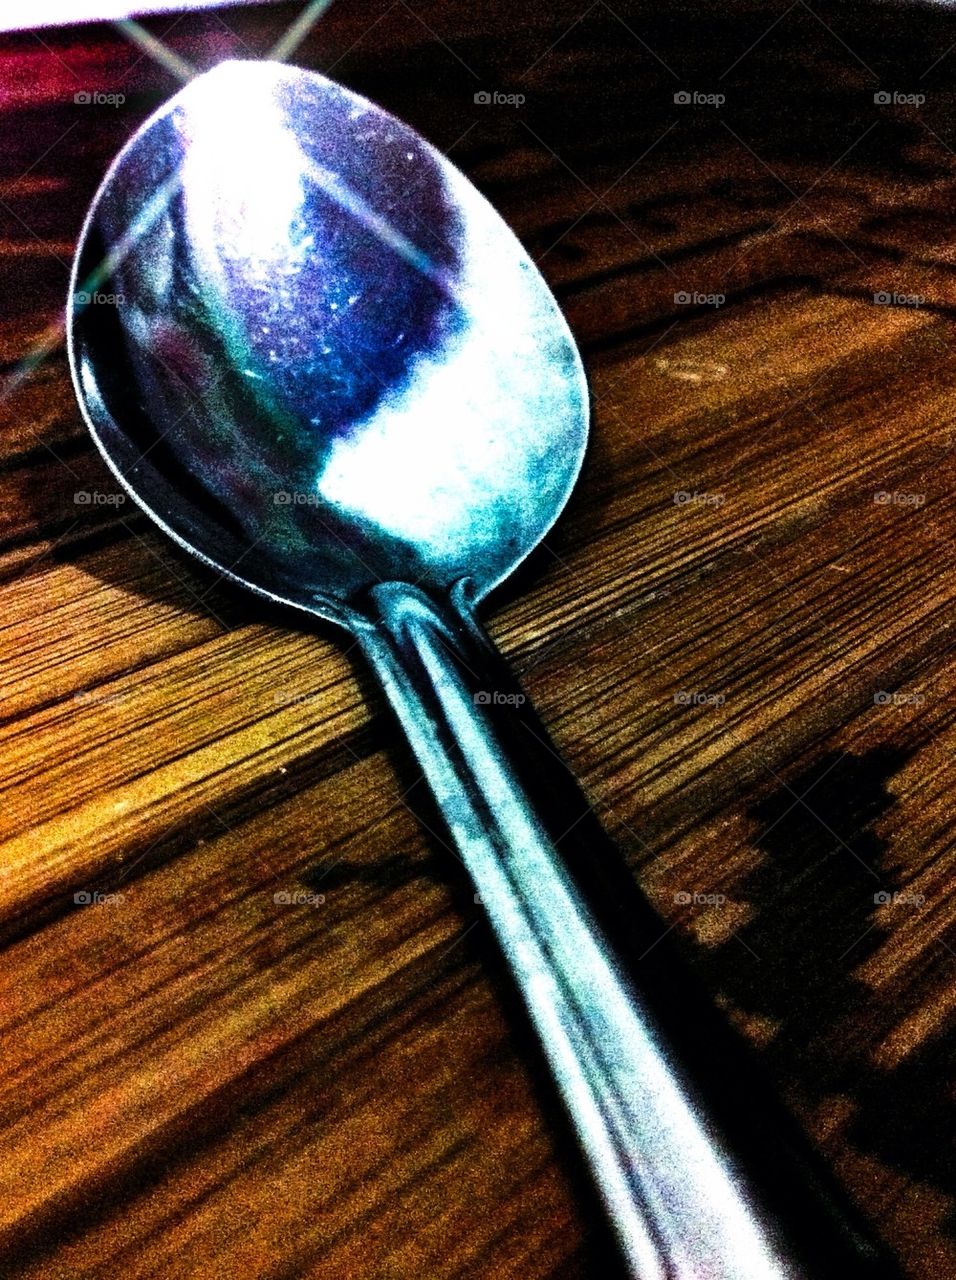 A spoon on table